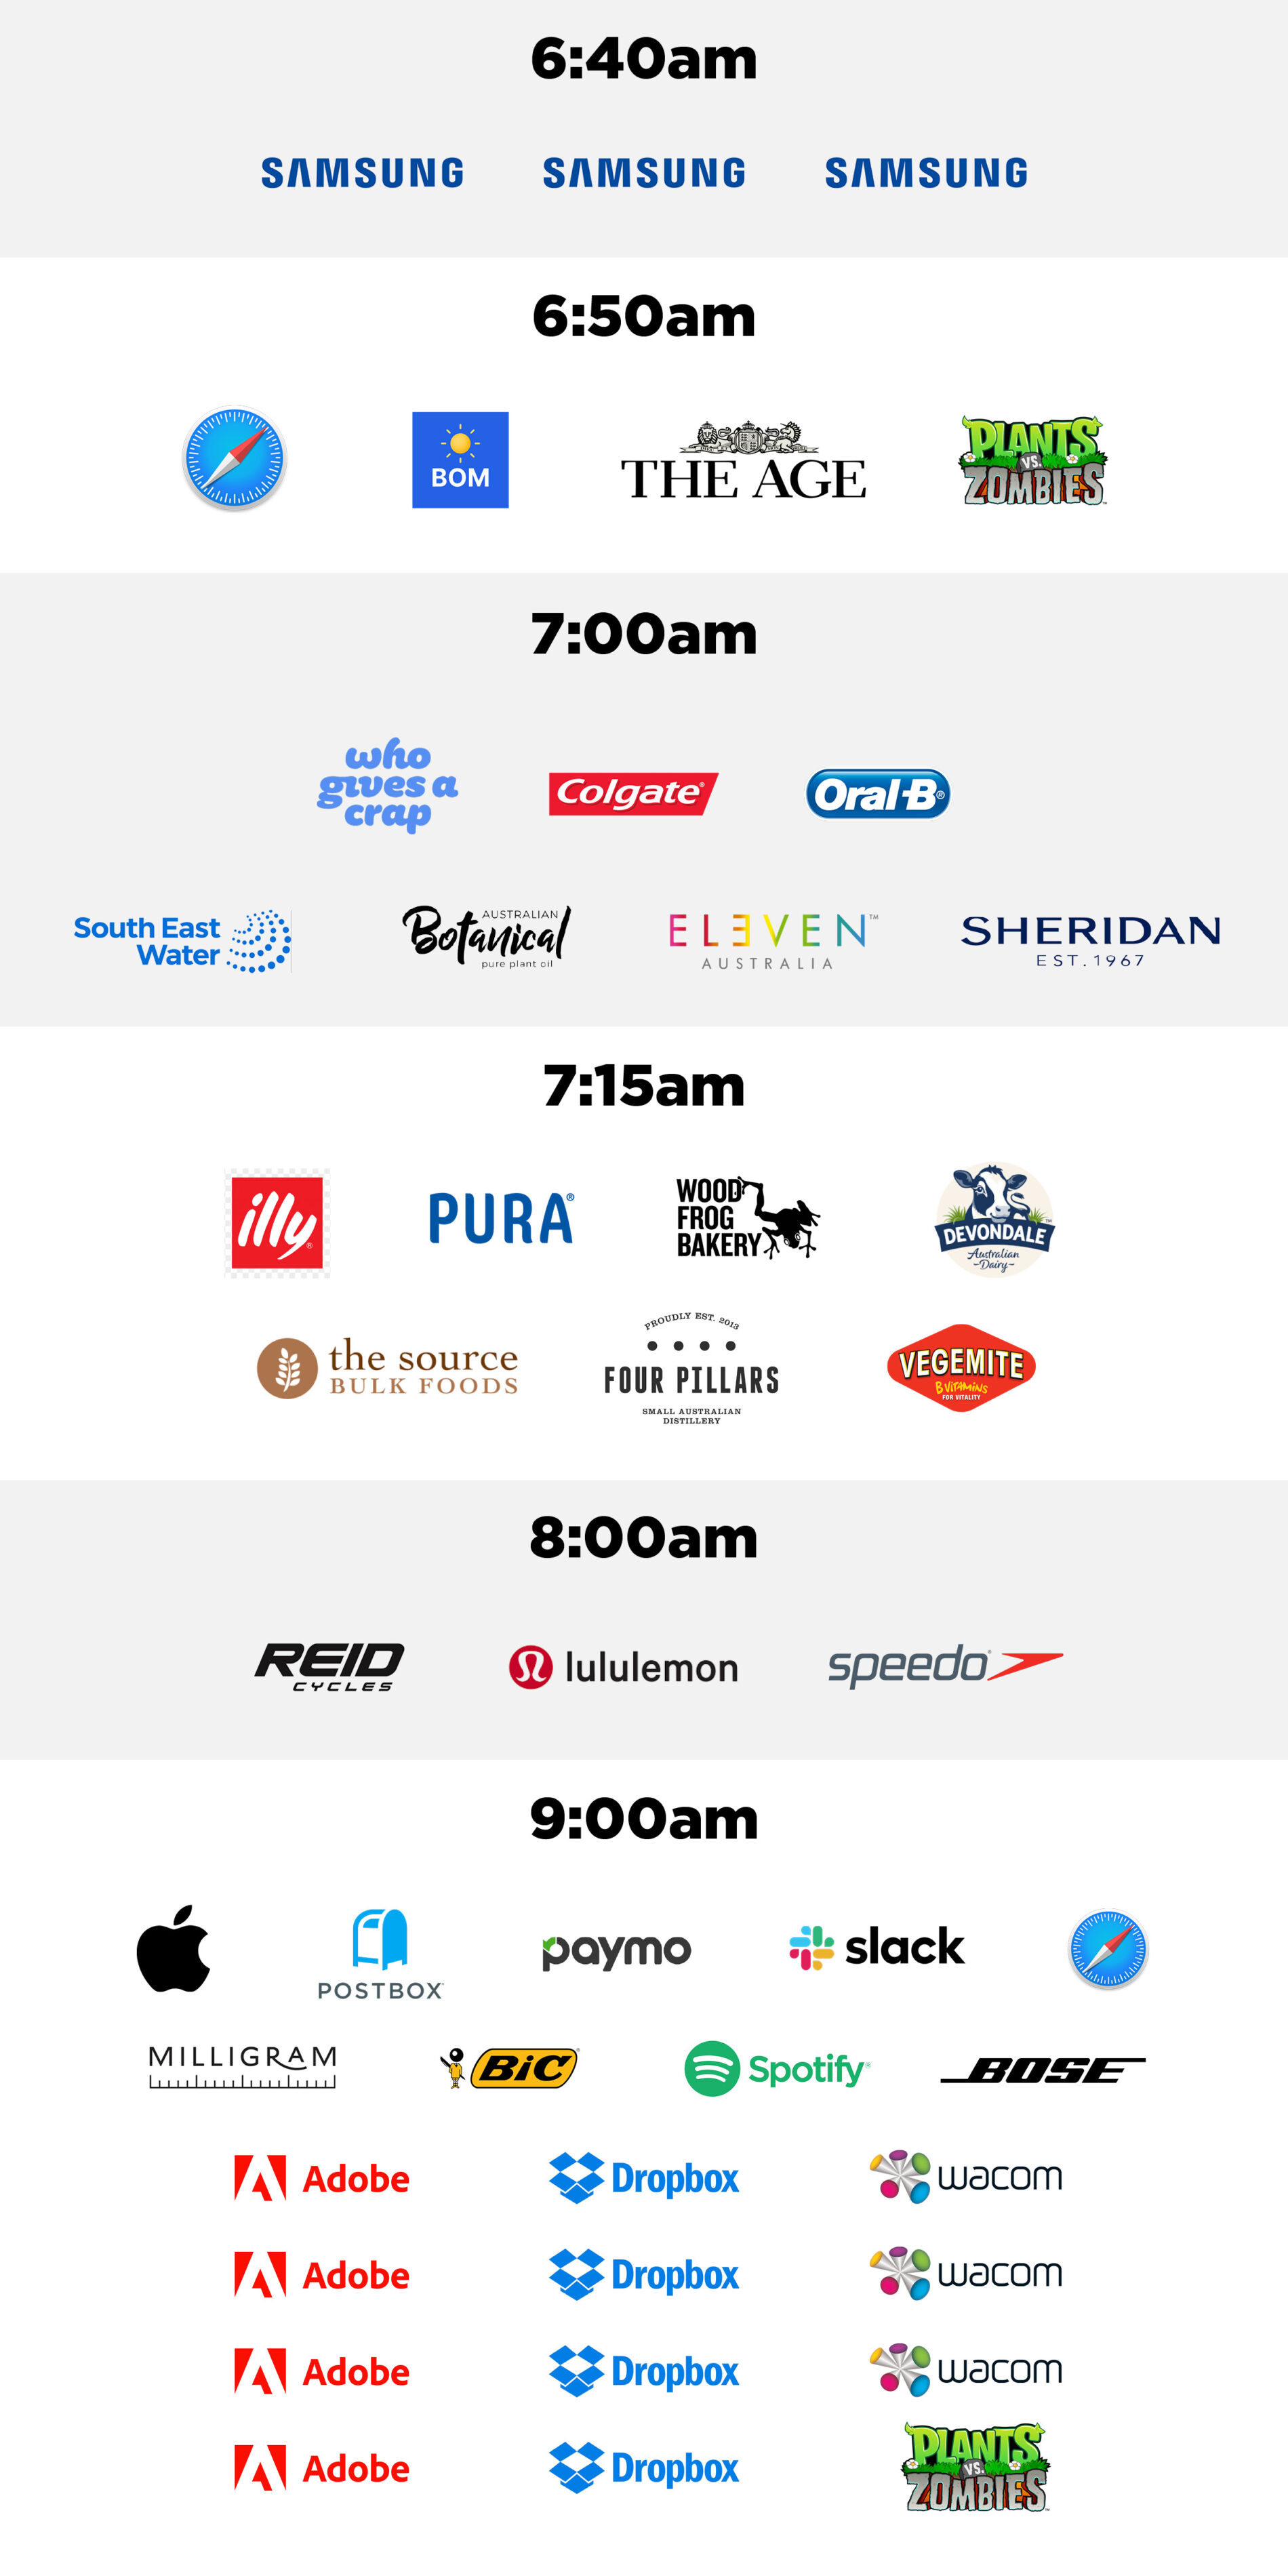 A typical day from 7am-1pm, showing all brands interacted with